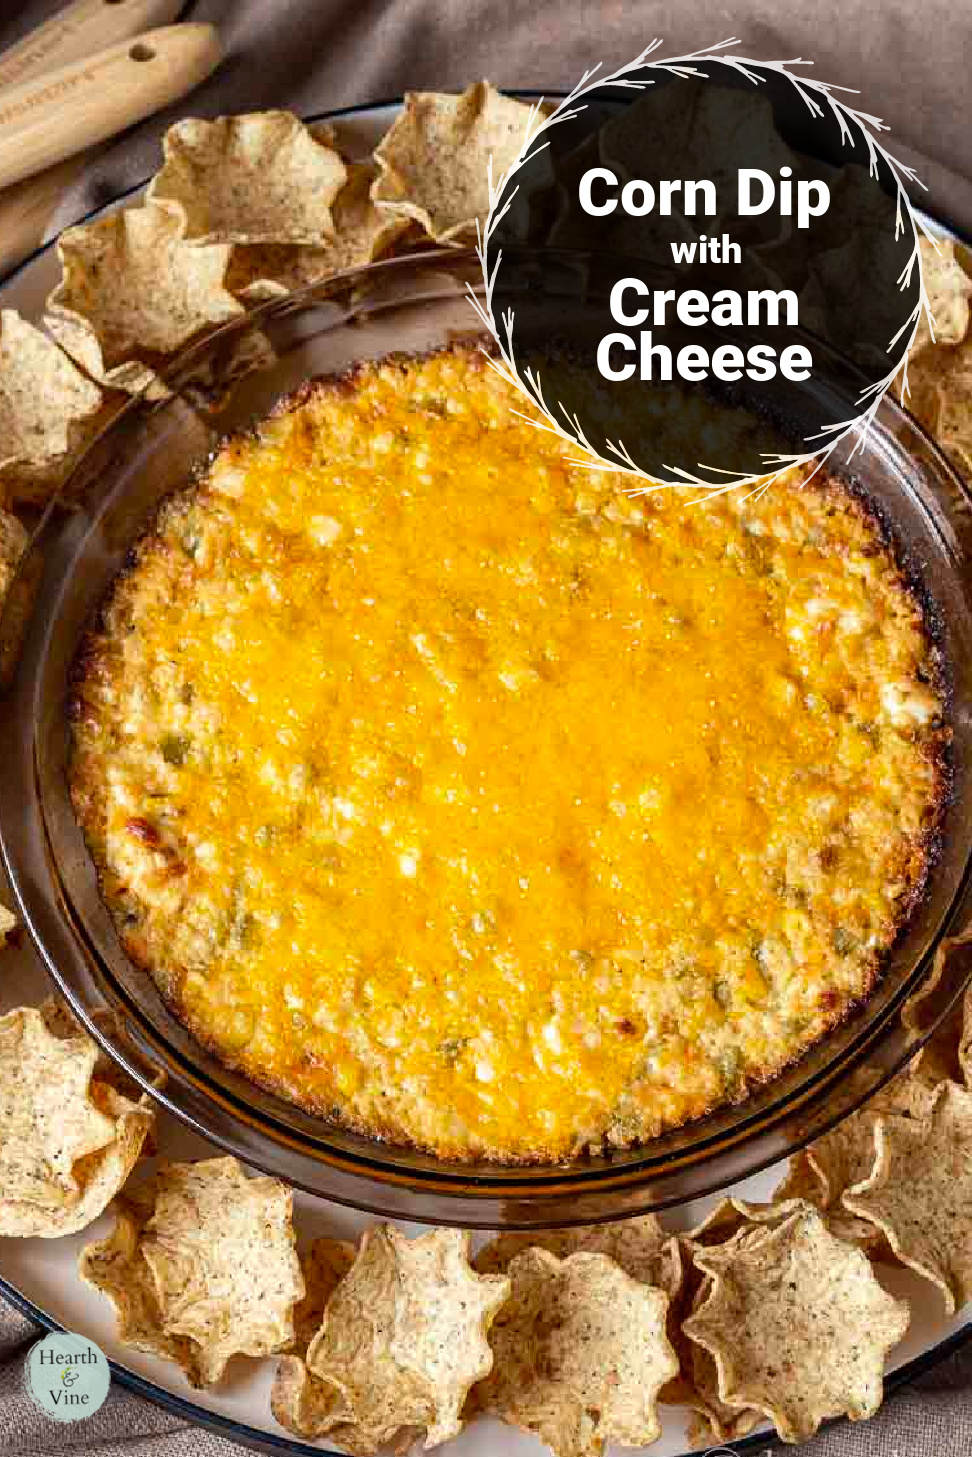 A pie plate with baked corn dip and chips around the edges.